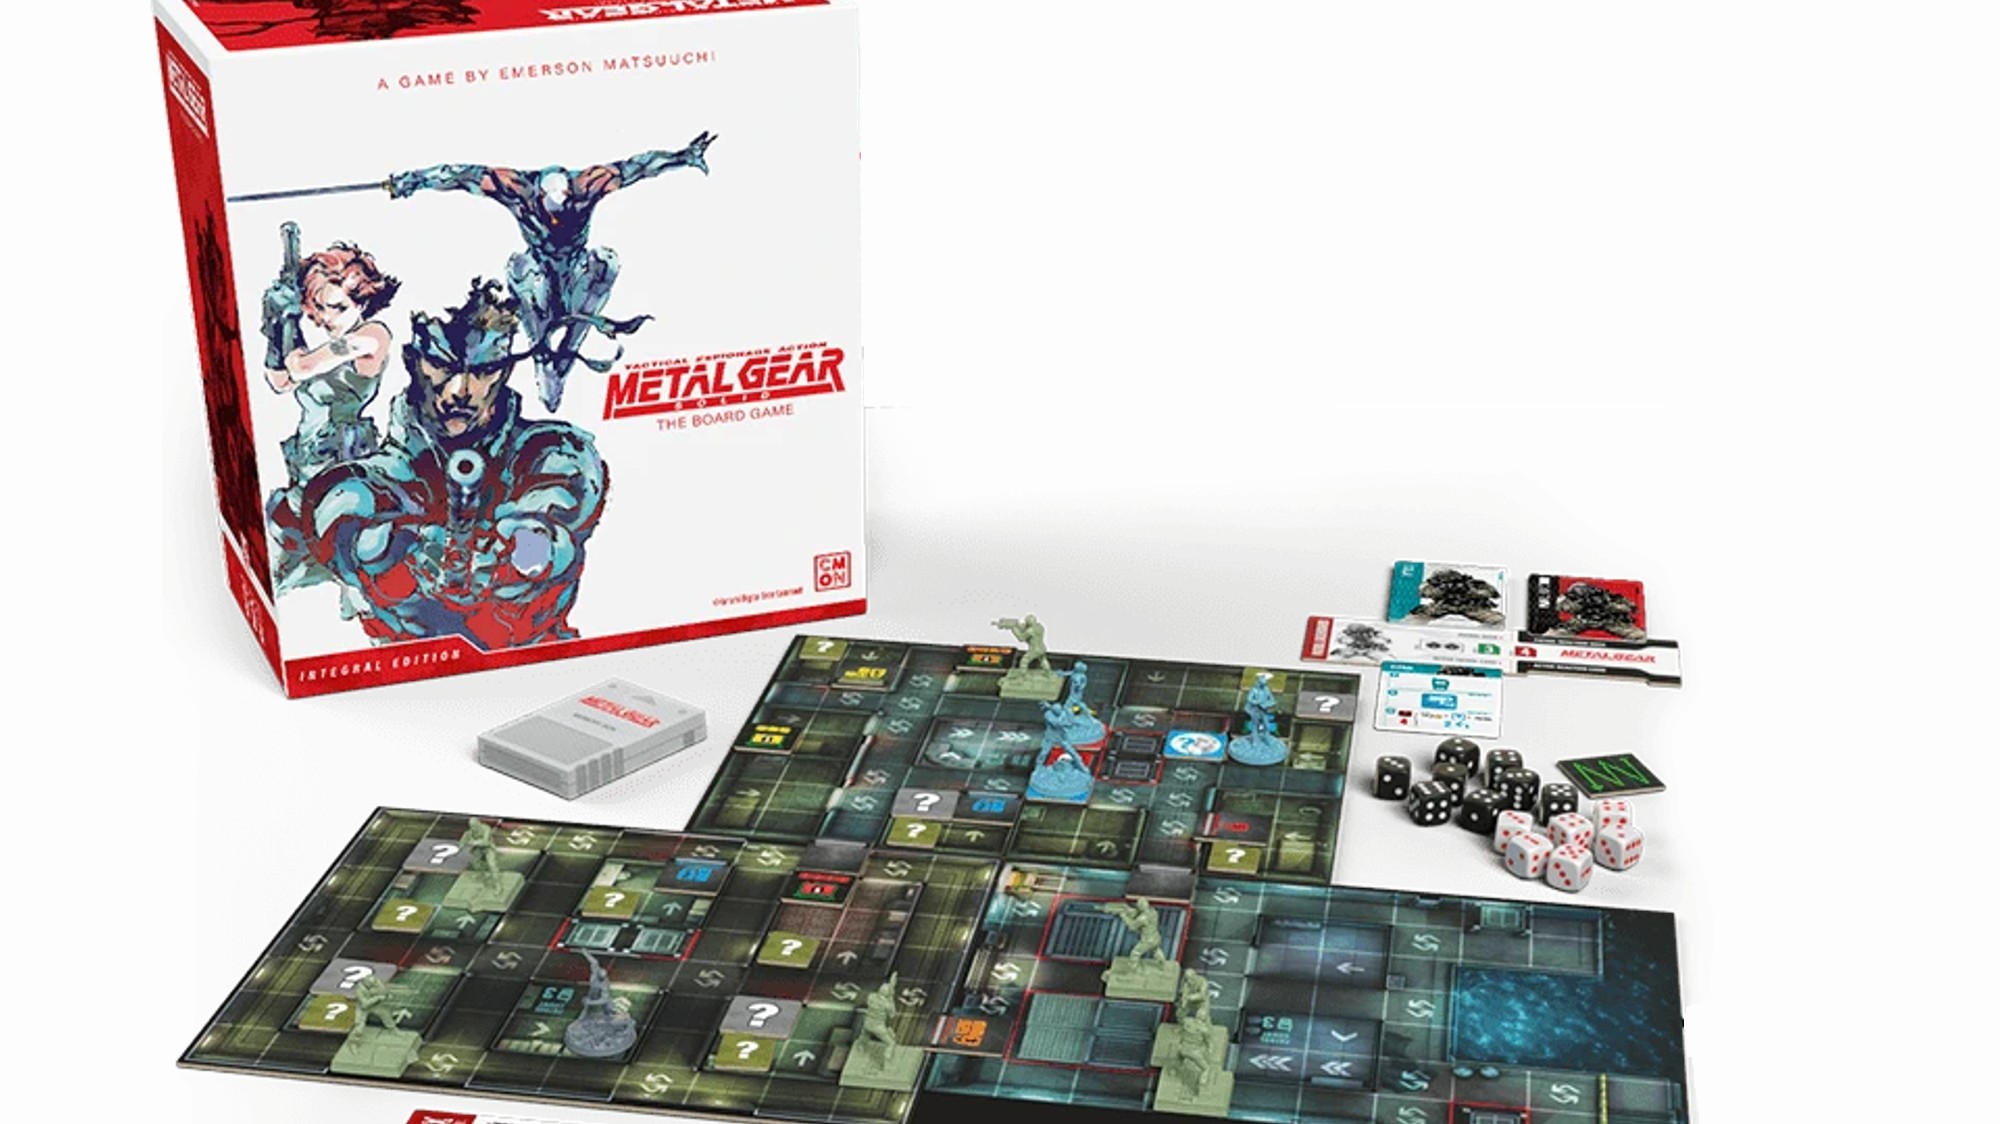 Metal Gear Solid: The Board Game from CMON